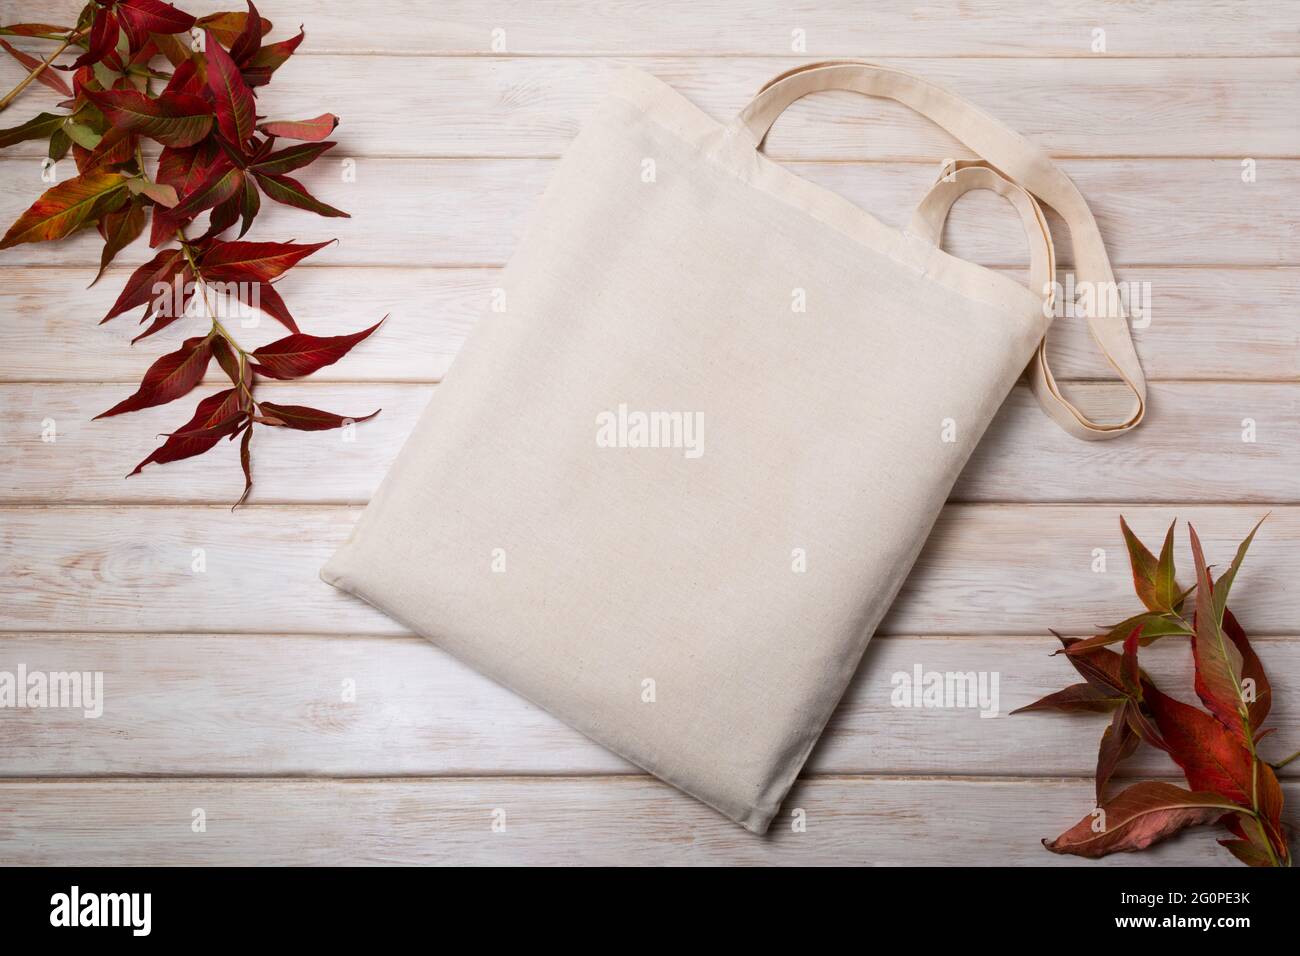 Canvas tote bag mockup with red leaves wild grass. Rustic linen shopper bag mock up for branding presentation Stock Photo